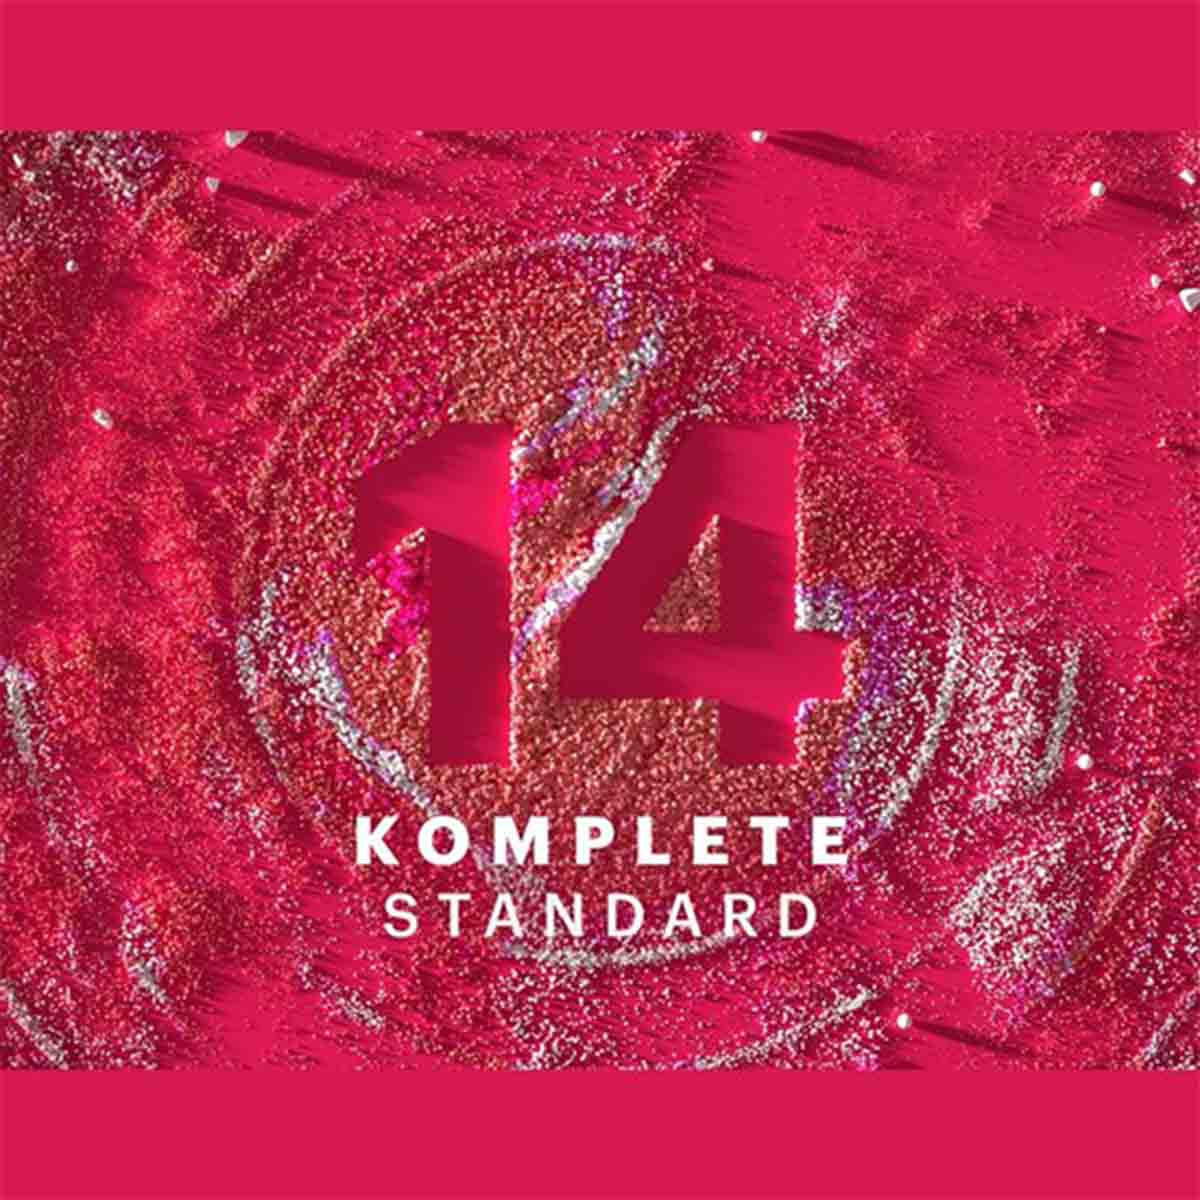 Native Instruments NI Komplete 14 Standard Upgrade (from Komplete Collections) - DOWNLOAD CODE